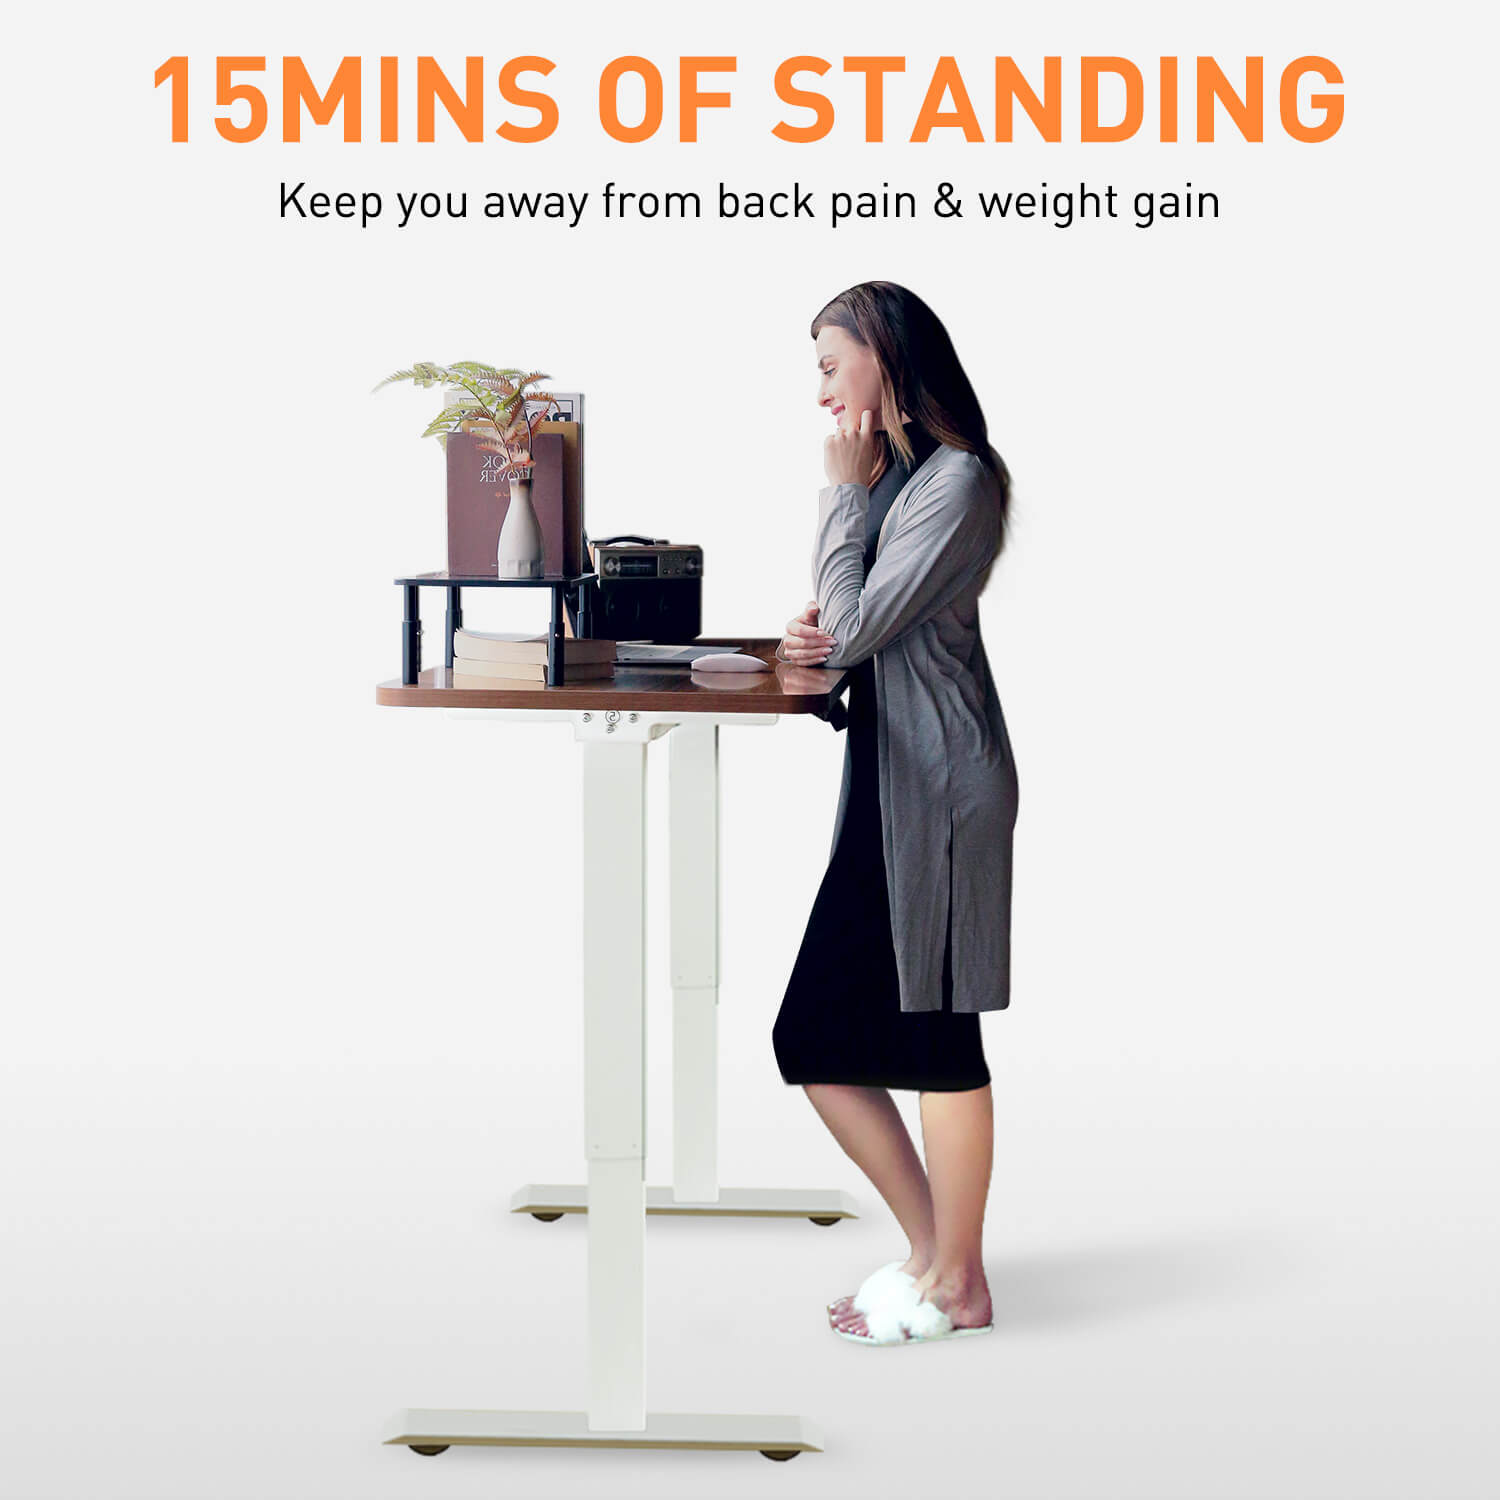 Walnut standing while at work to reduce back or neck pain